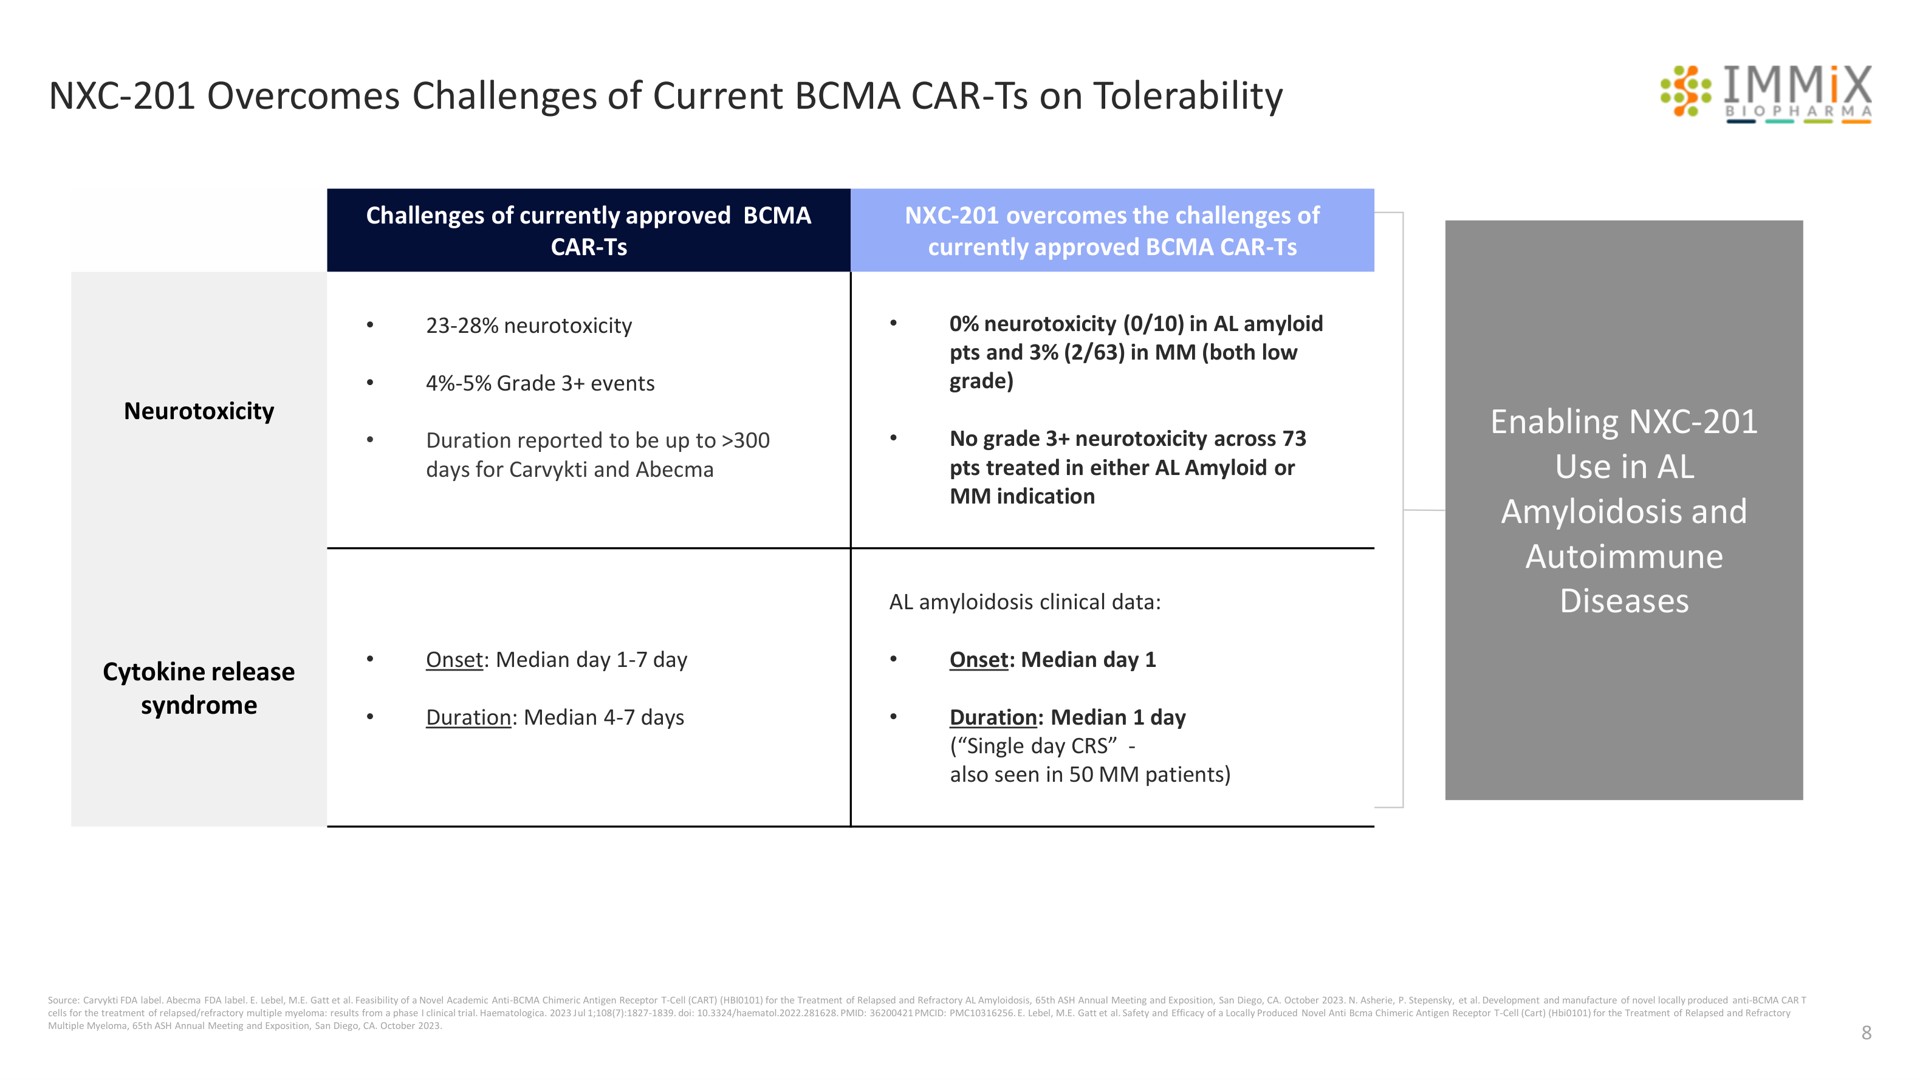 overcomes challenges of current car on tolerability enabling use in amyloidosis and diseases | Immix Biopharma